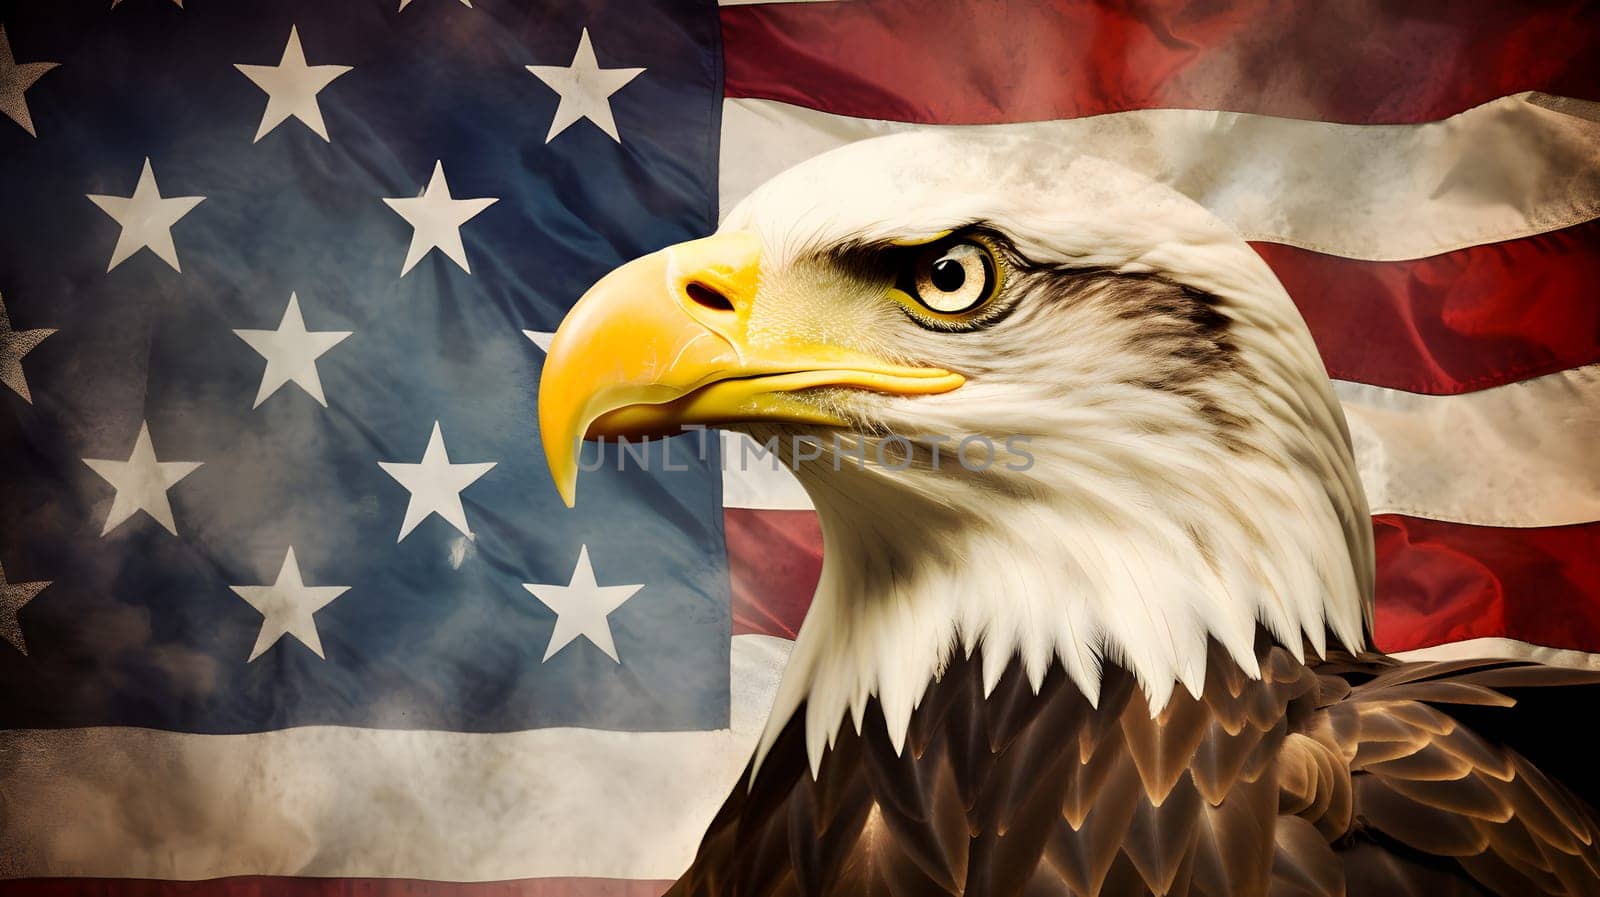 North American Bald Eagle on American flag background, neural network generated photorealistic image by z1b